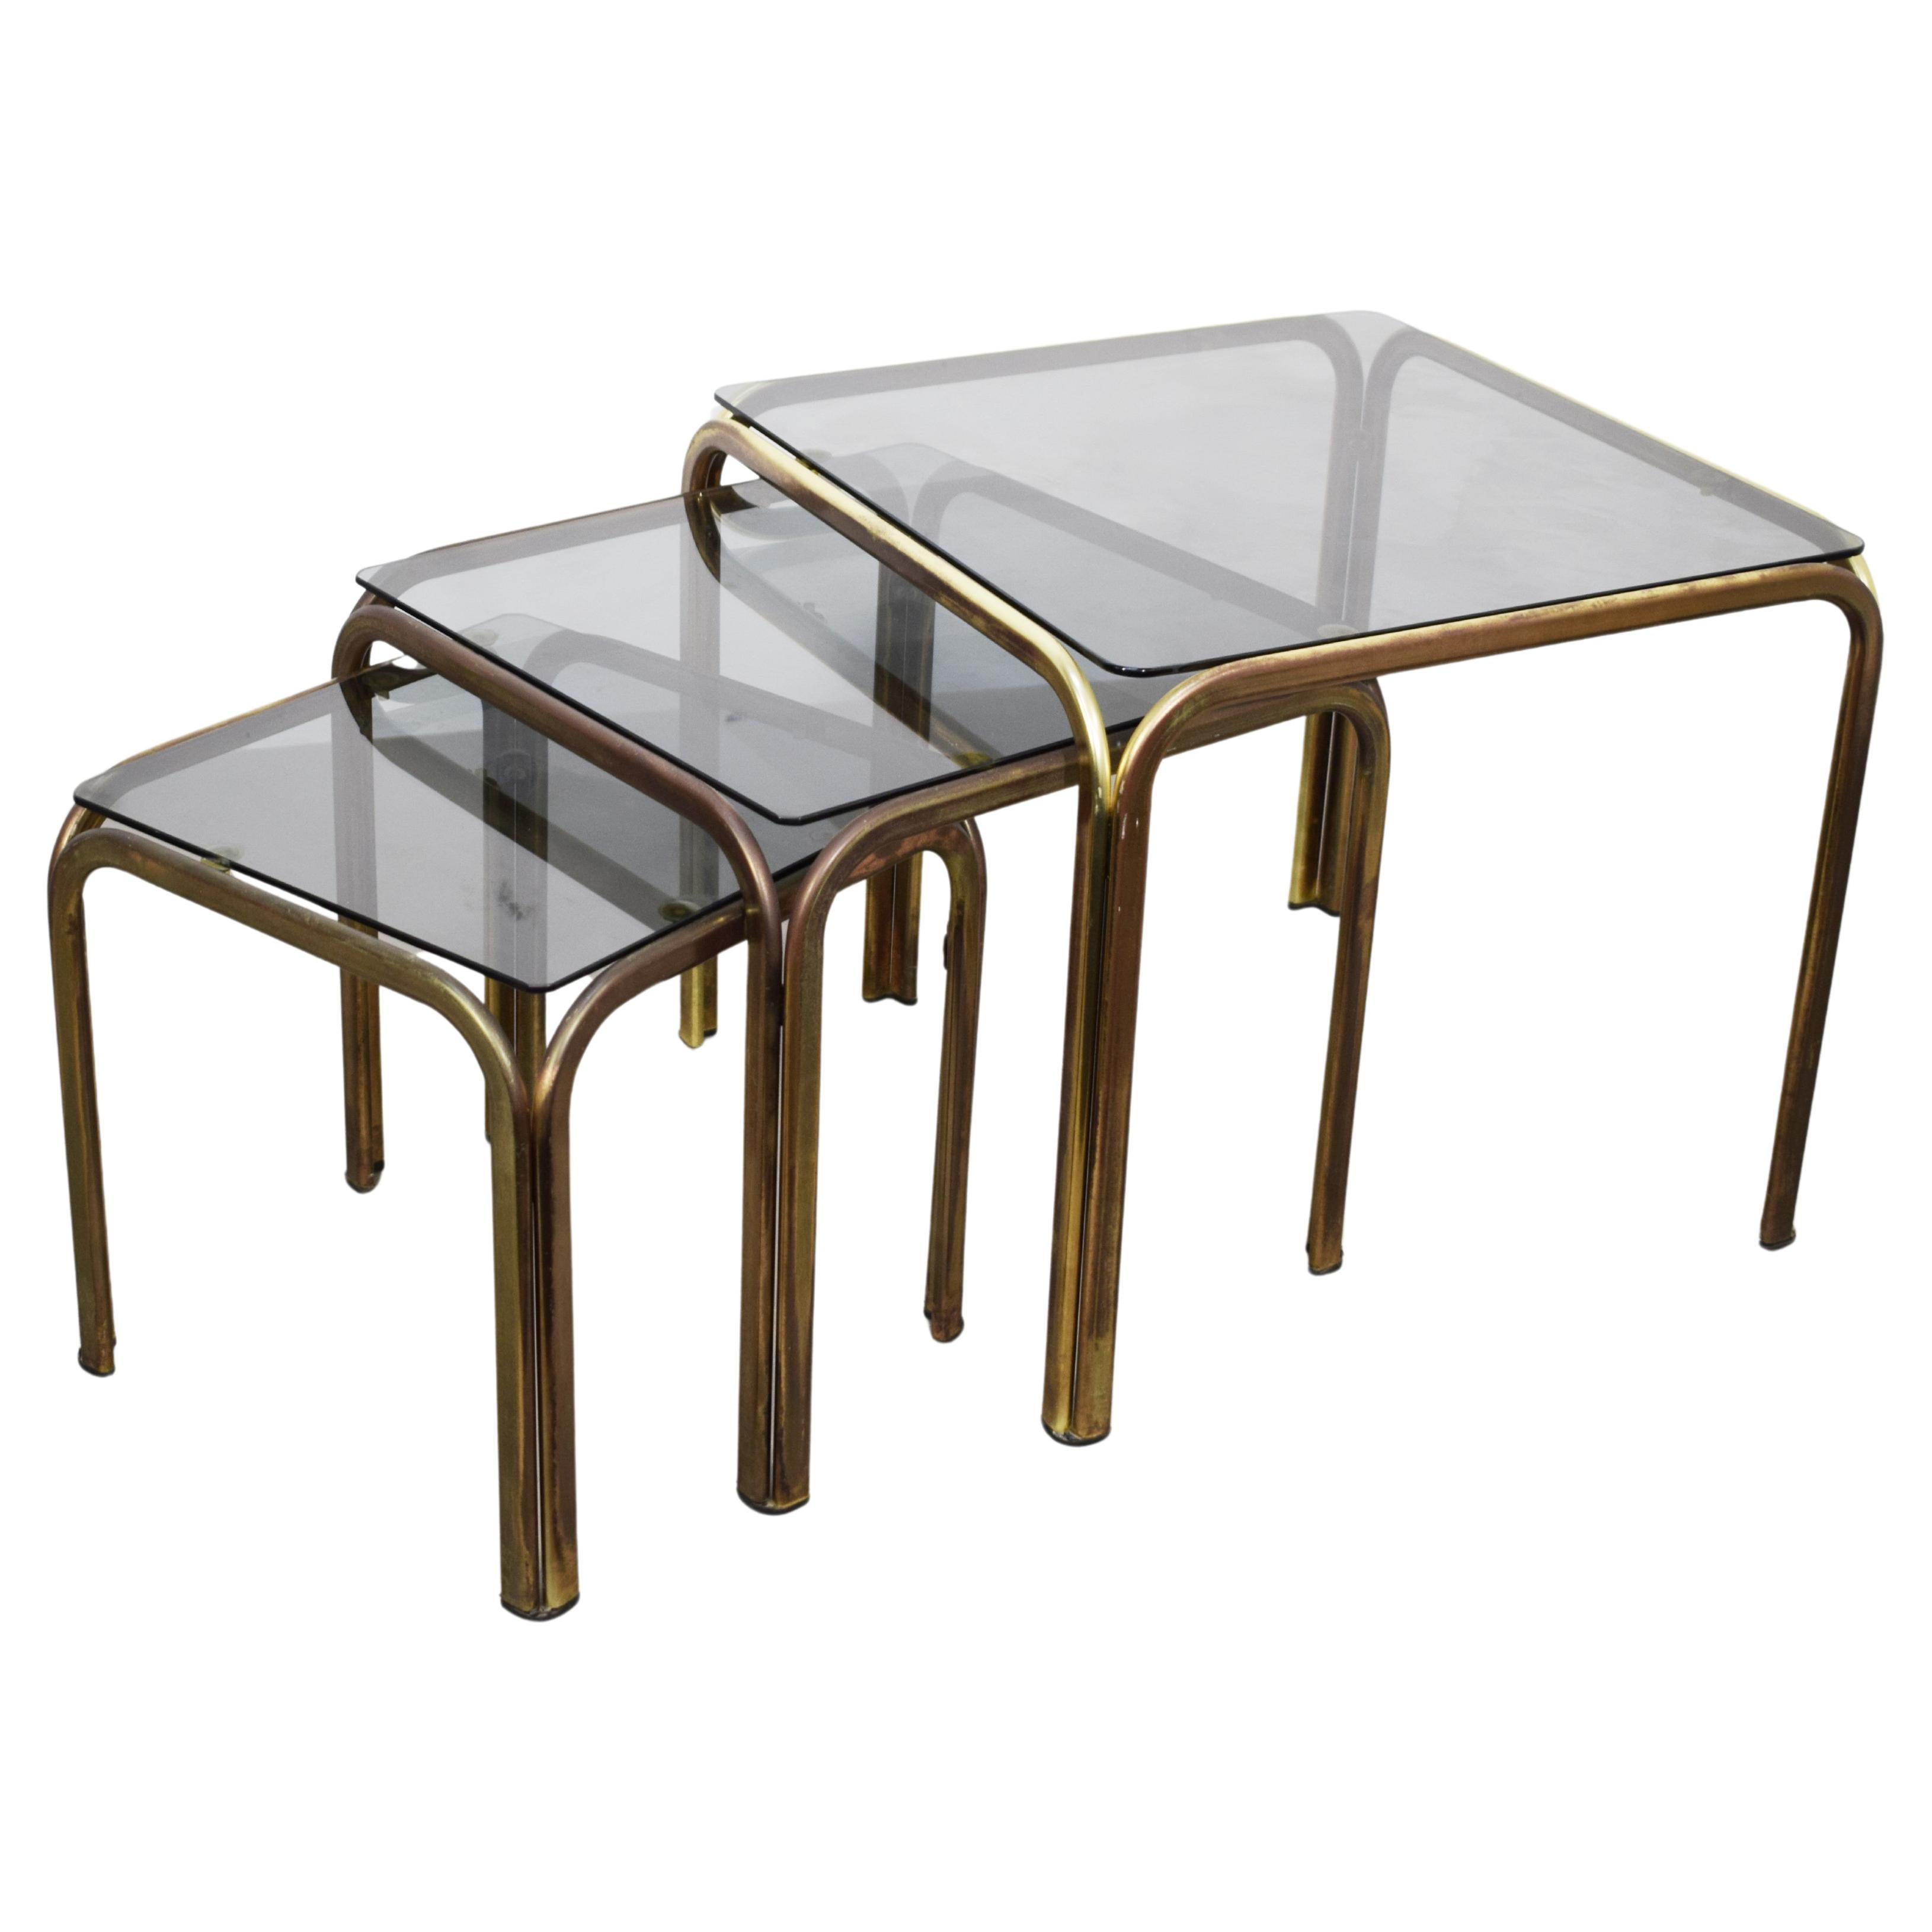 Set of 3 stackable coffee tables, brass and smoked glass, 1970s. For Sale